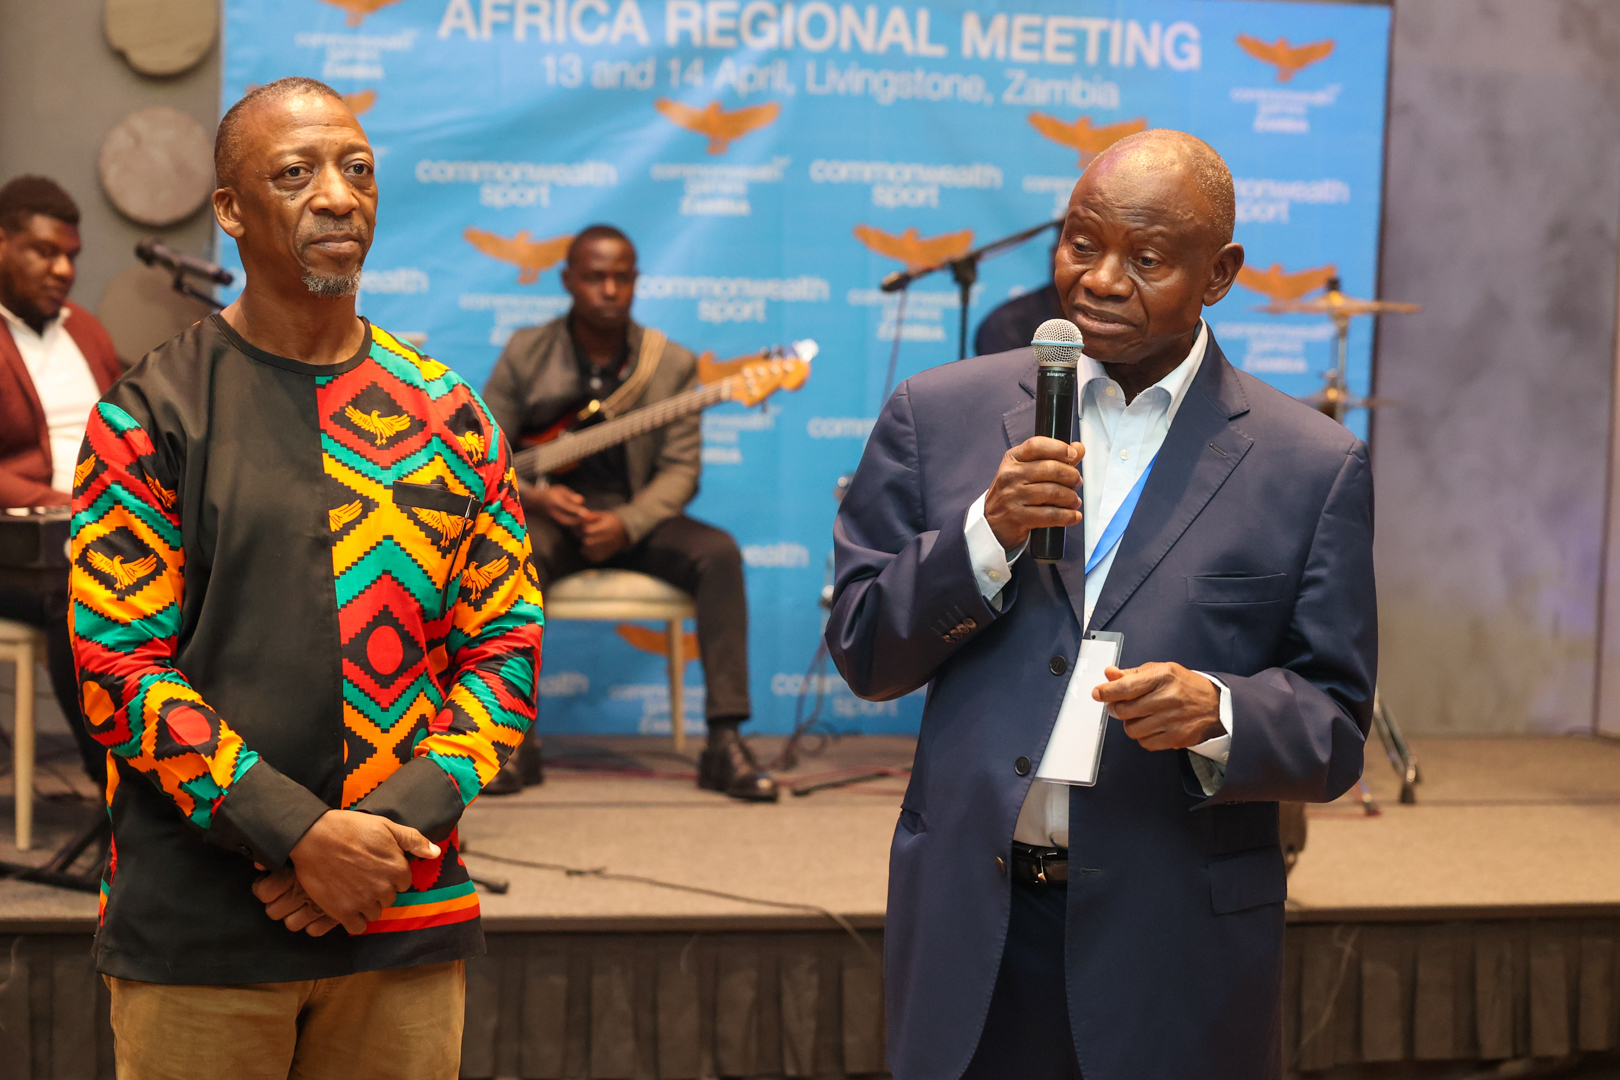 Delegates from across Africa attended the Commonwealth Sport Regional meeting ©CGA Zambia